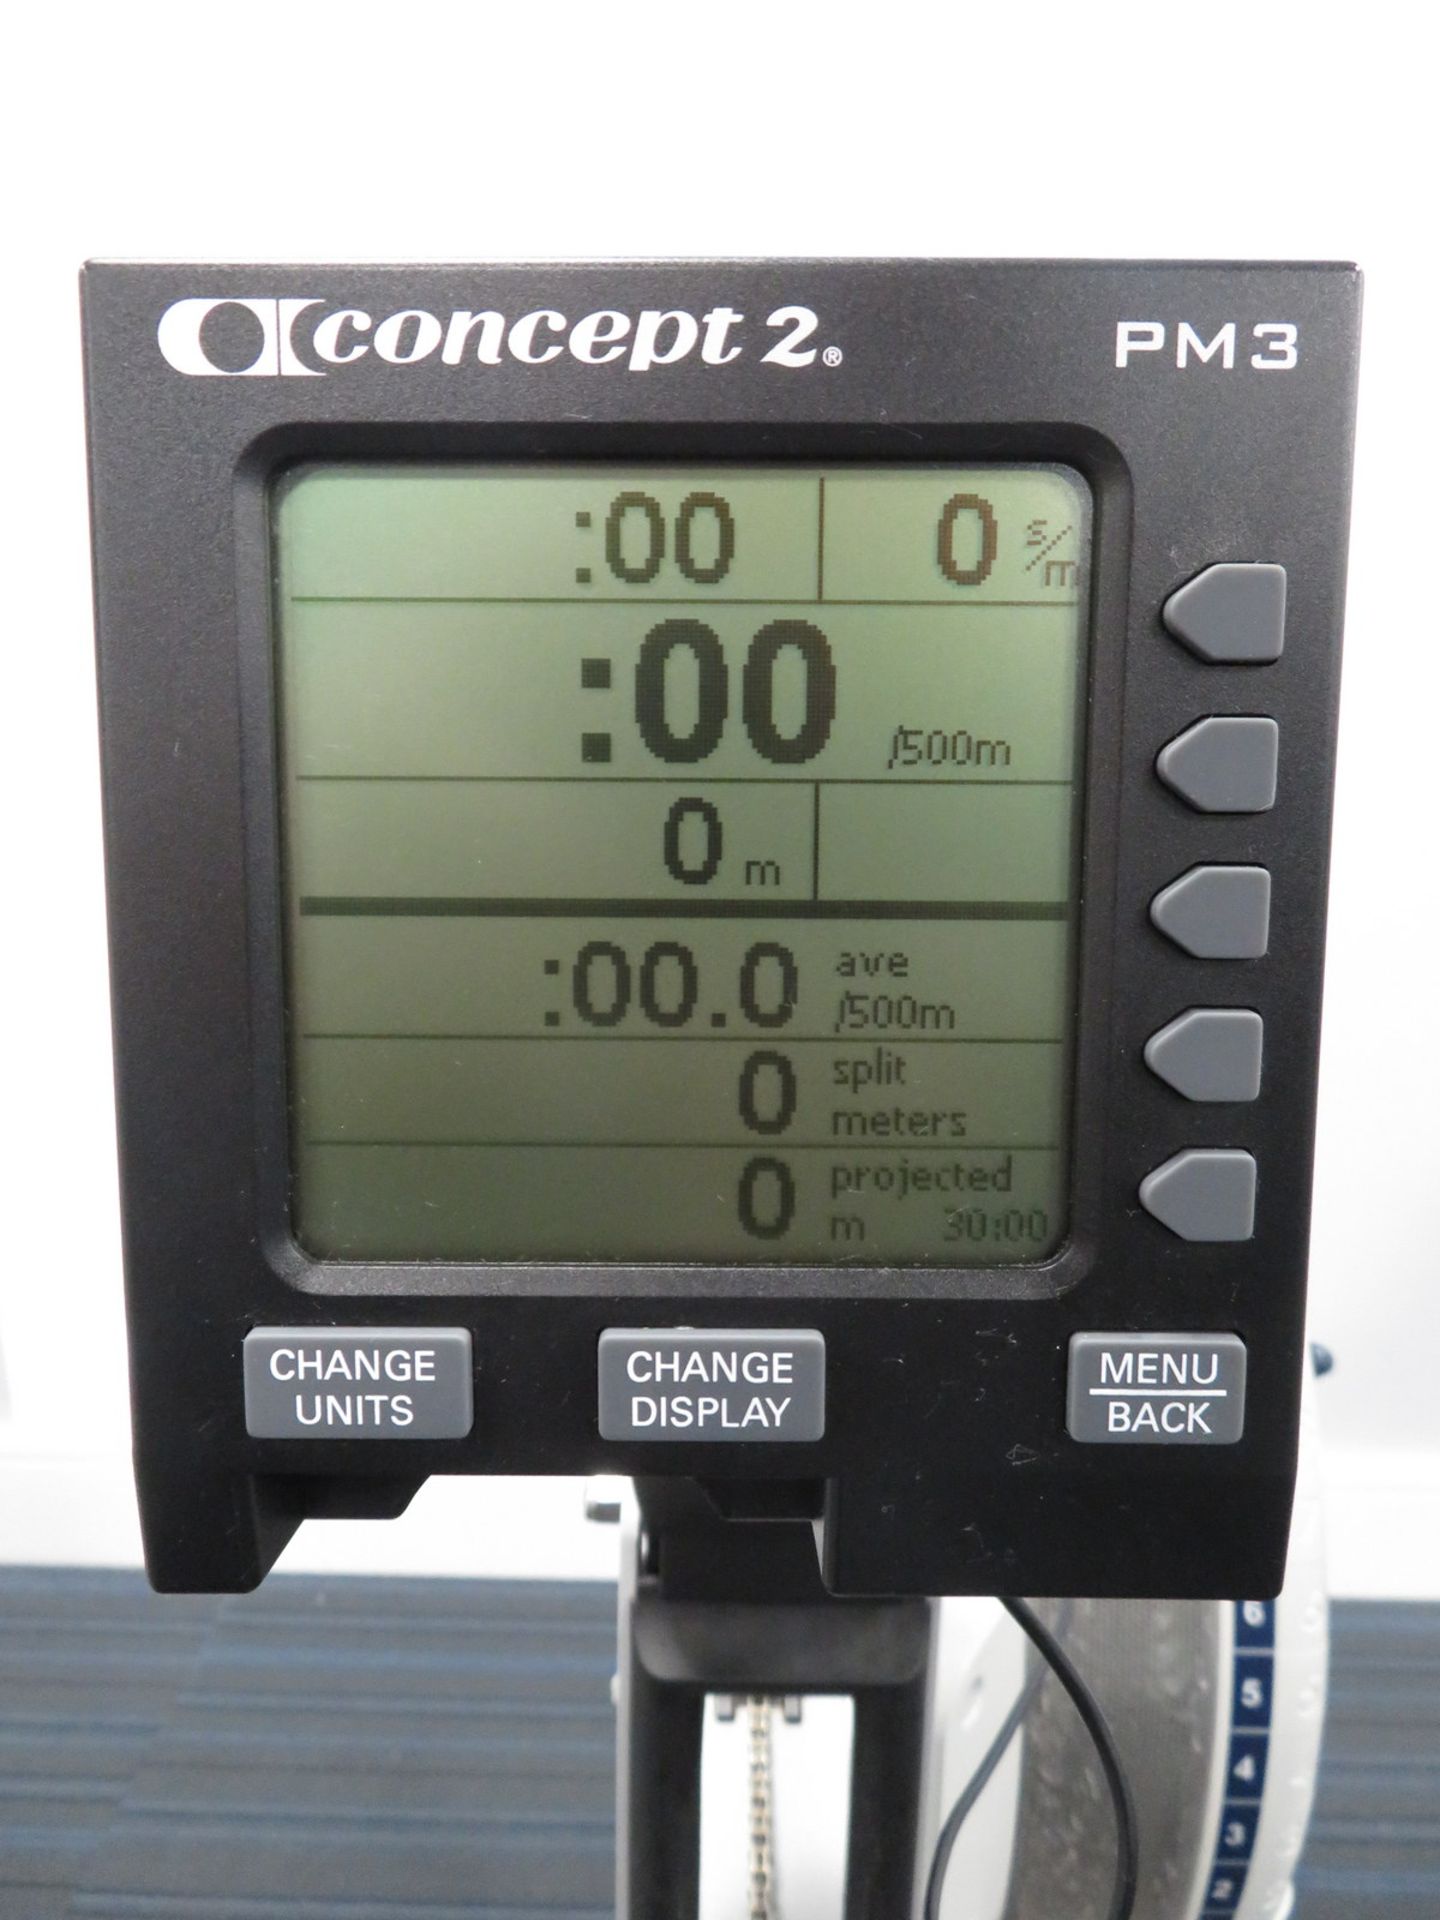 Concept 2 Indoor Rower Model D, Complete With PM3 Display Console. - Image 10 of 10